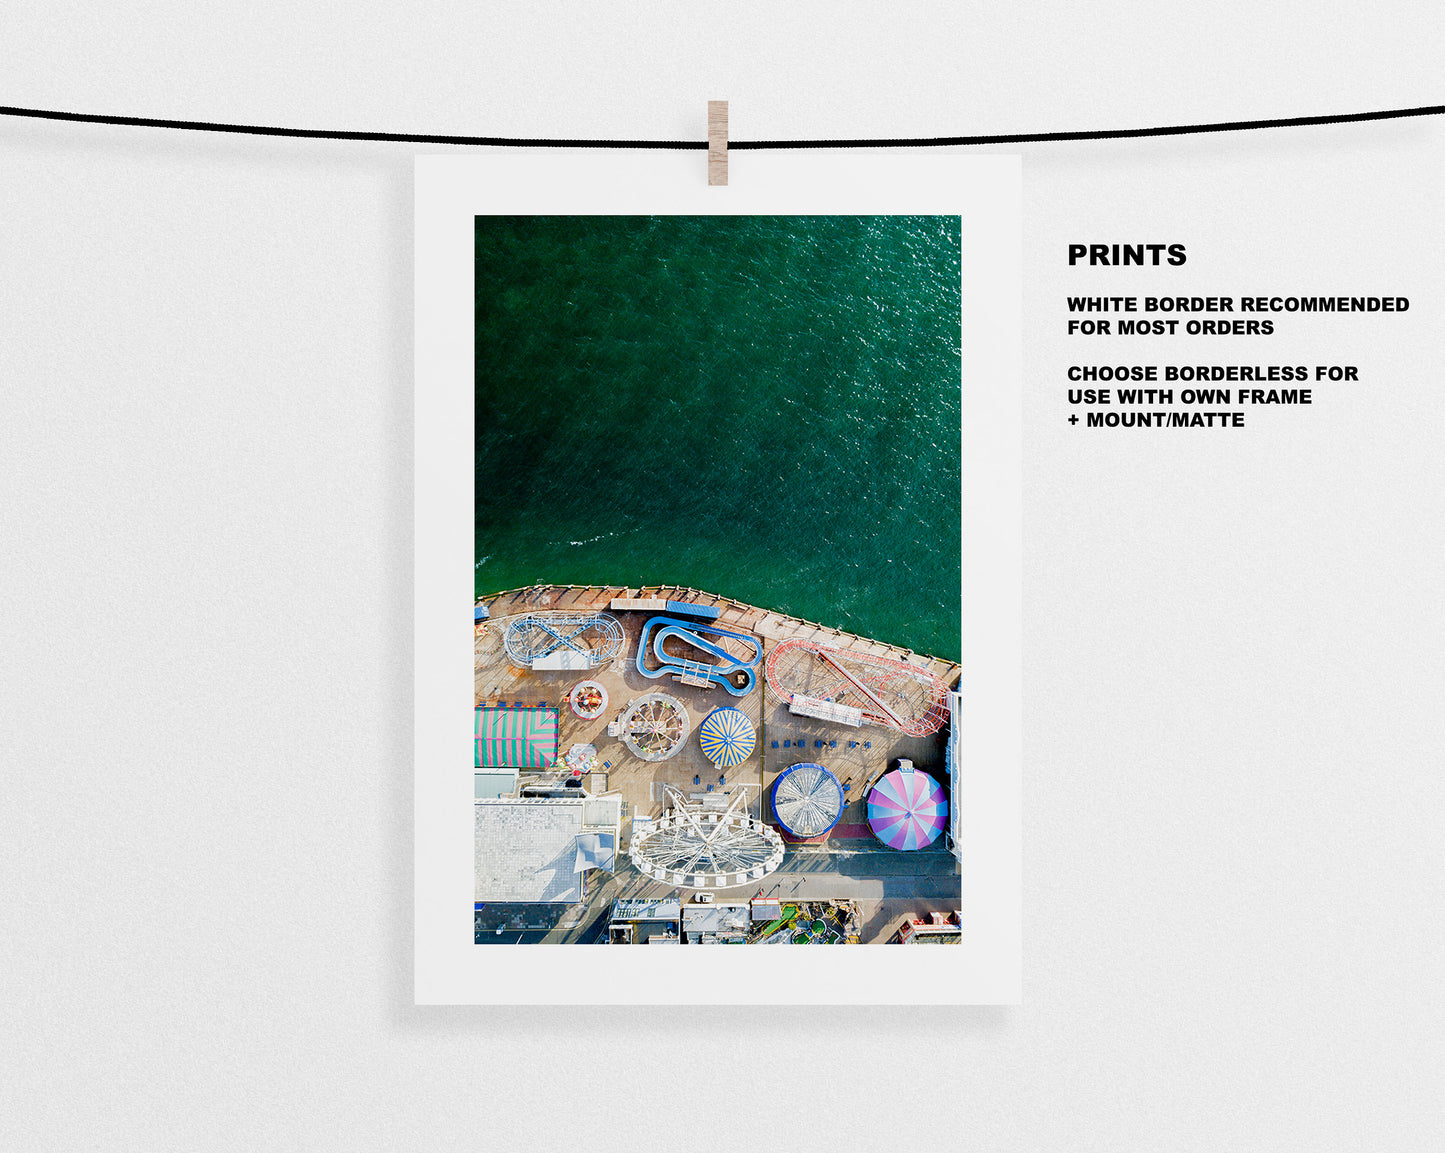 Clarence Pier - Photography Print - Portsmouth and Southsea Prints - Wall Art -  Frame and Canvas Options - Portrait - Aerial